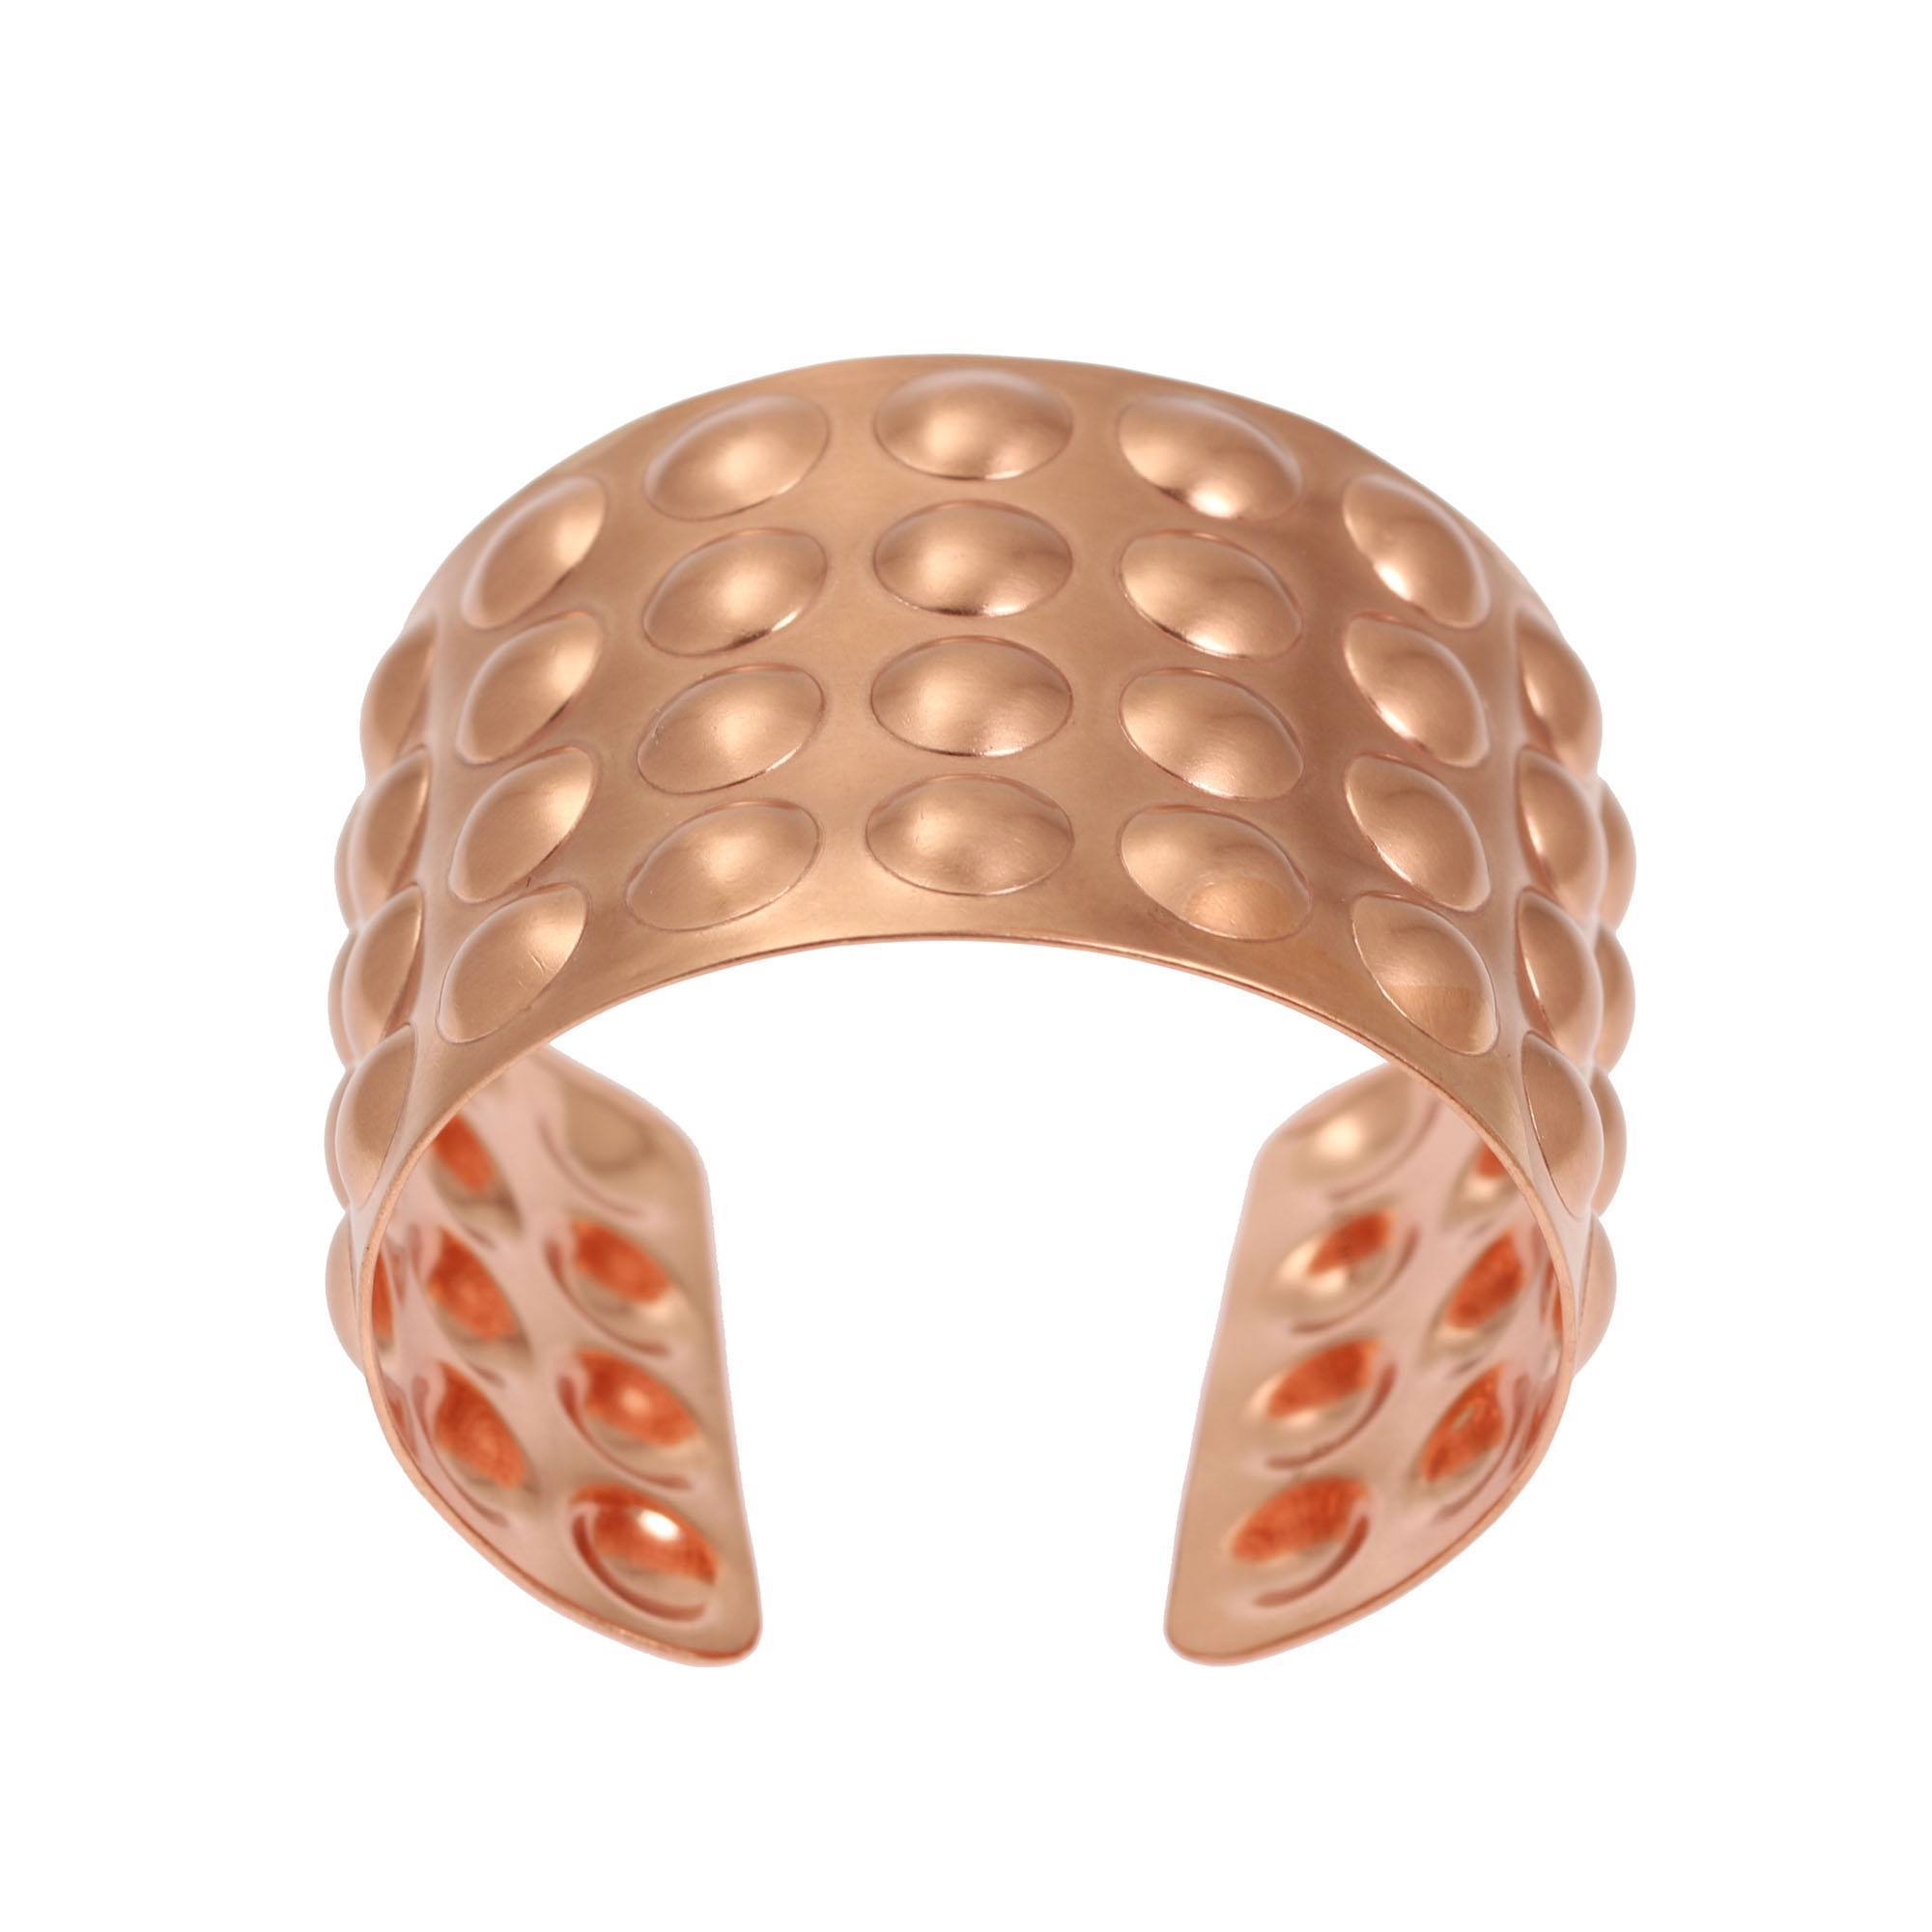 Top View of Brushed Copper Bubble Wrap Cuff Bracelet